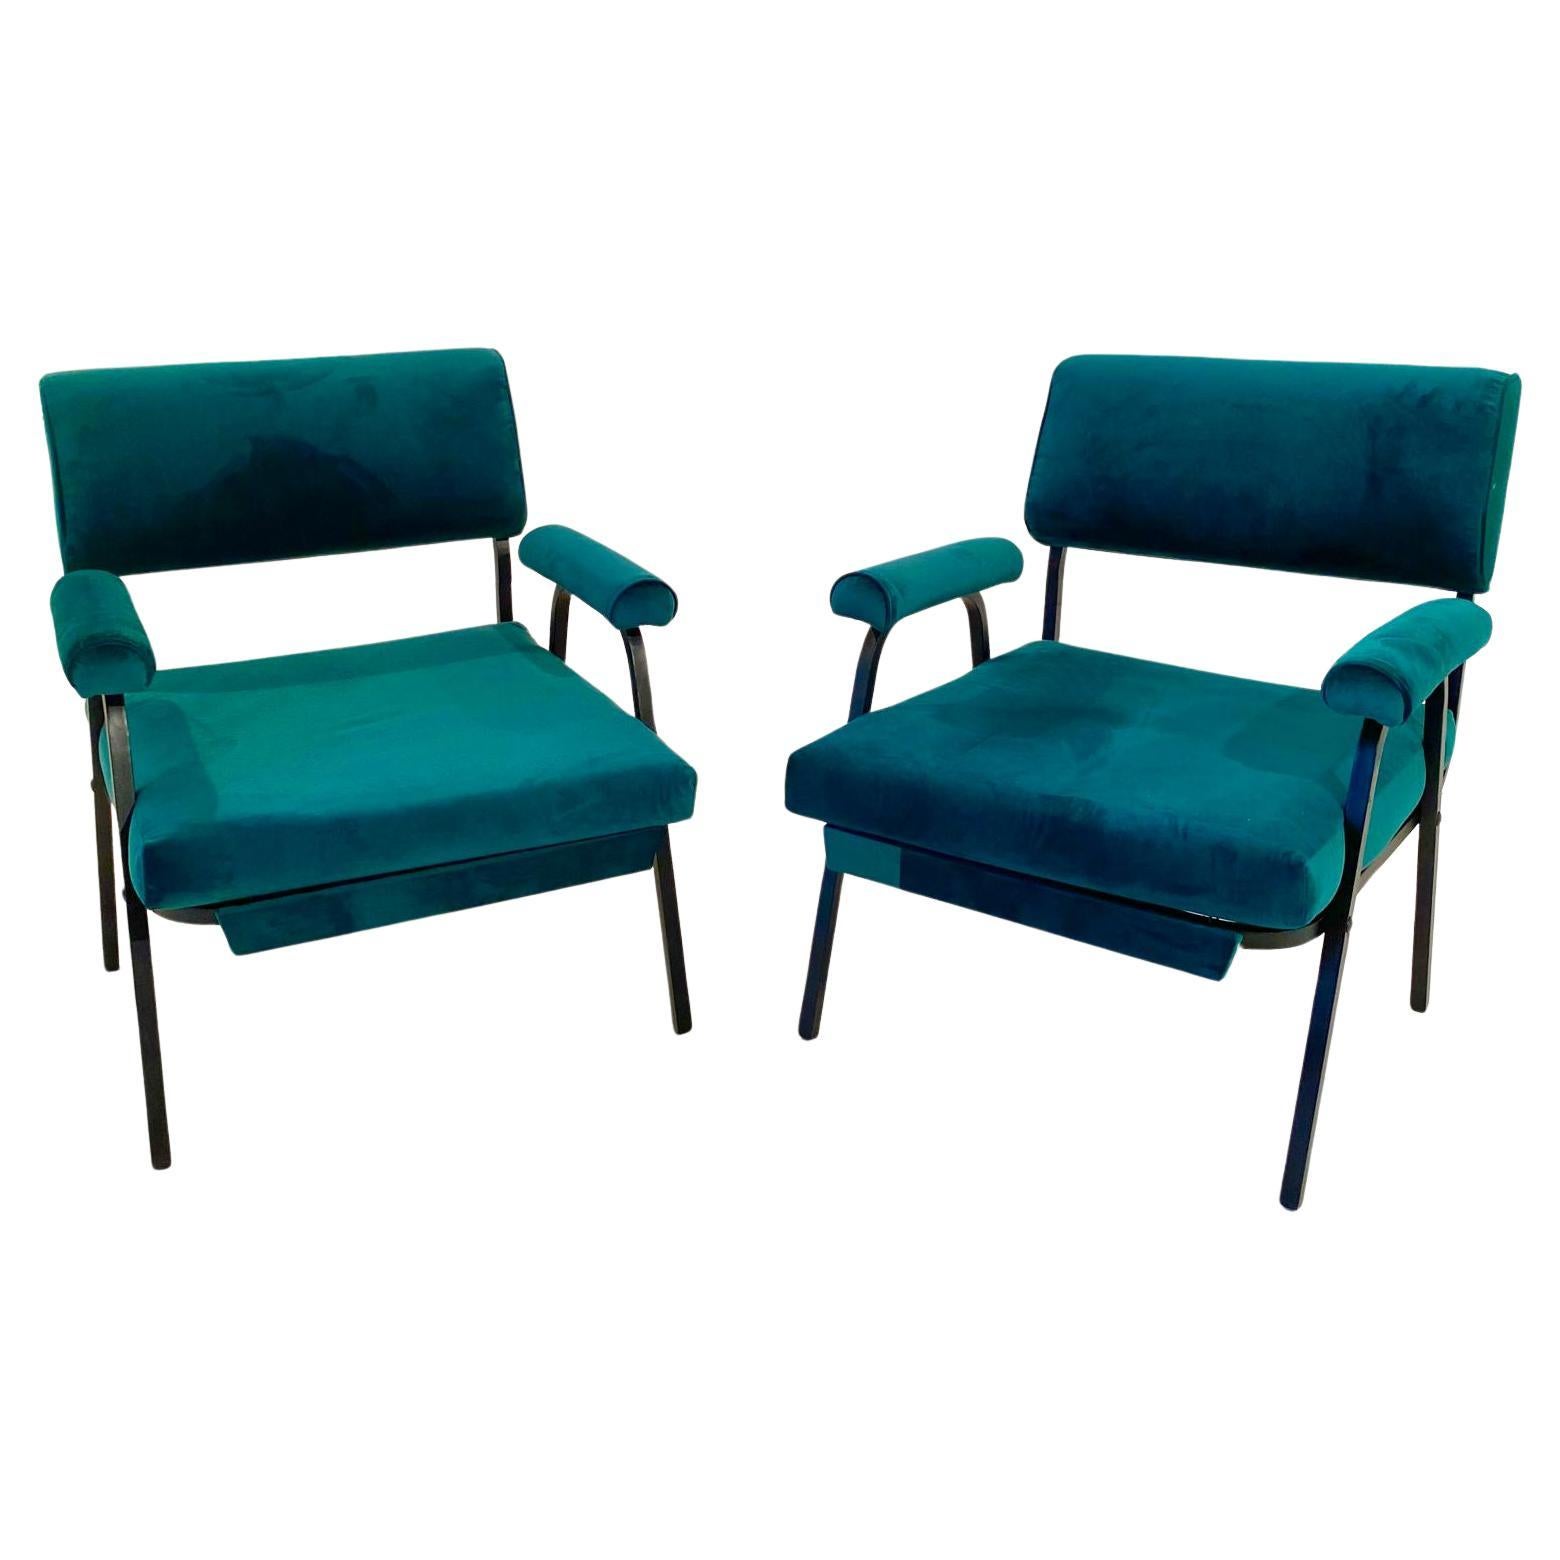 Mid-Century Modern Green velvet lounge chairs, Set of Two, vintage, Italy, 1960s